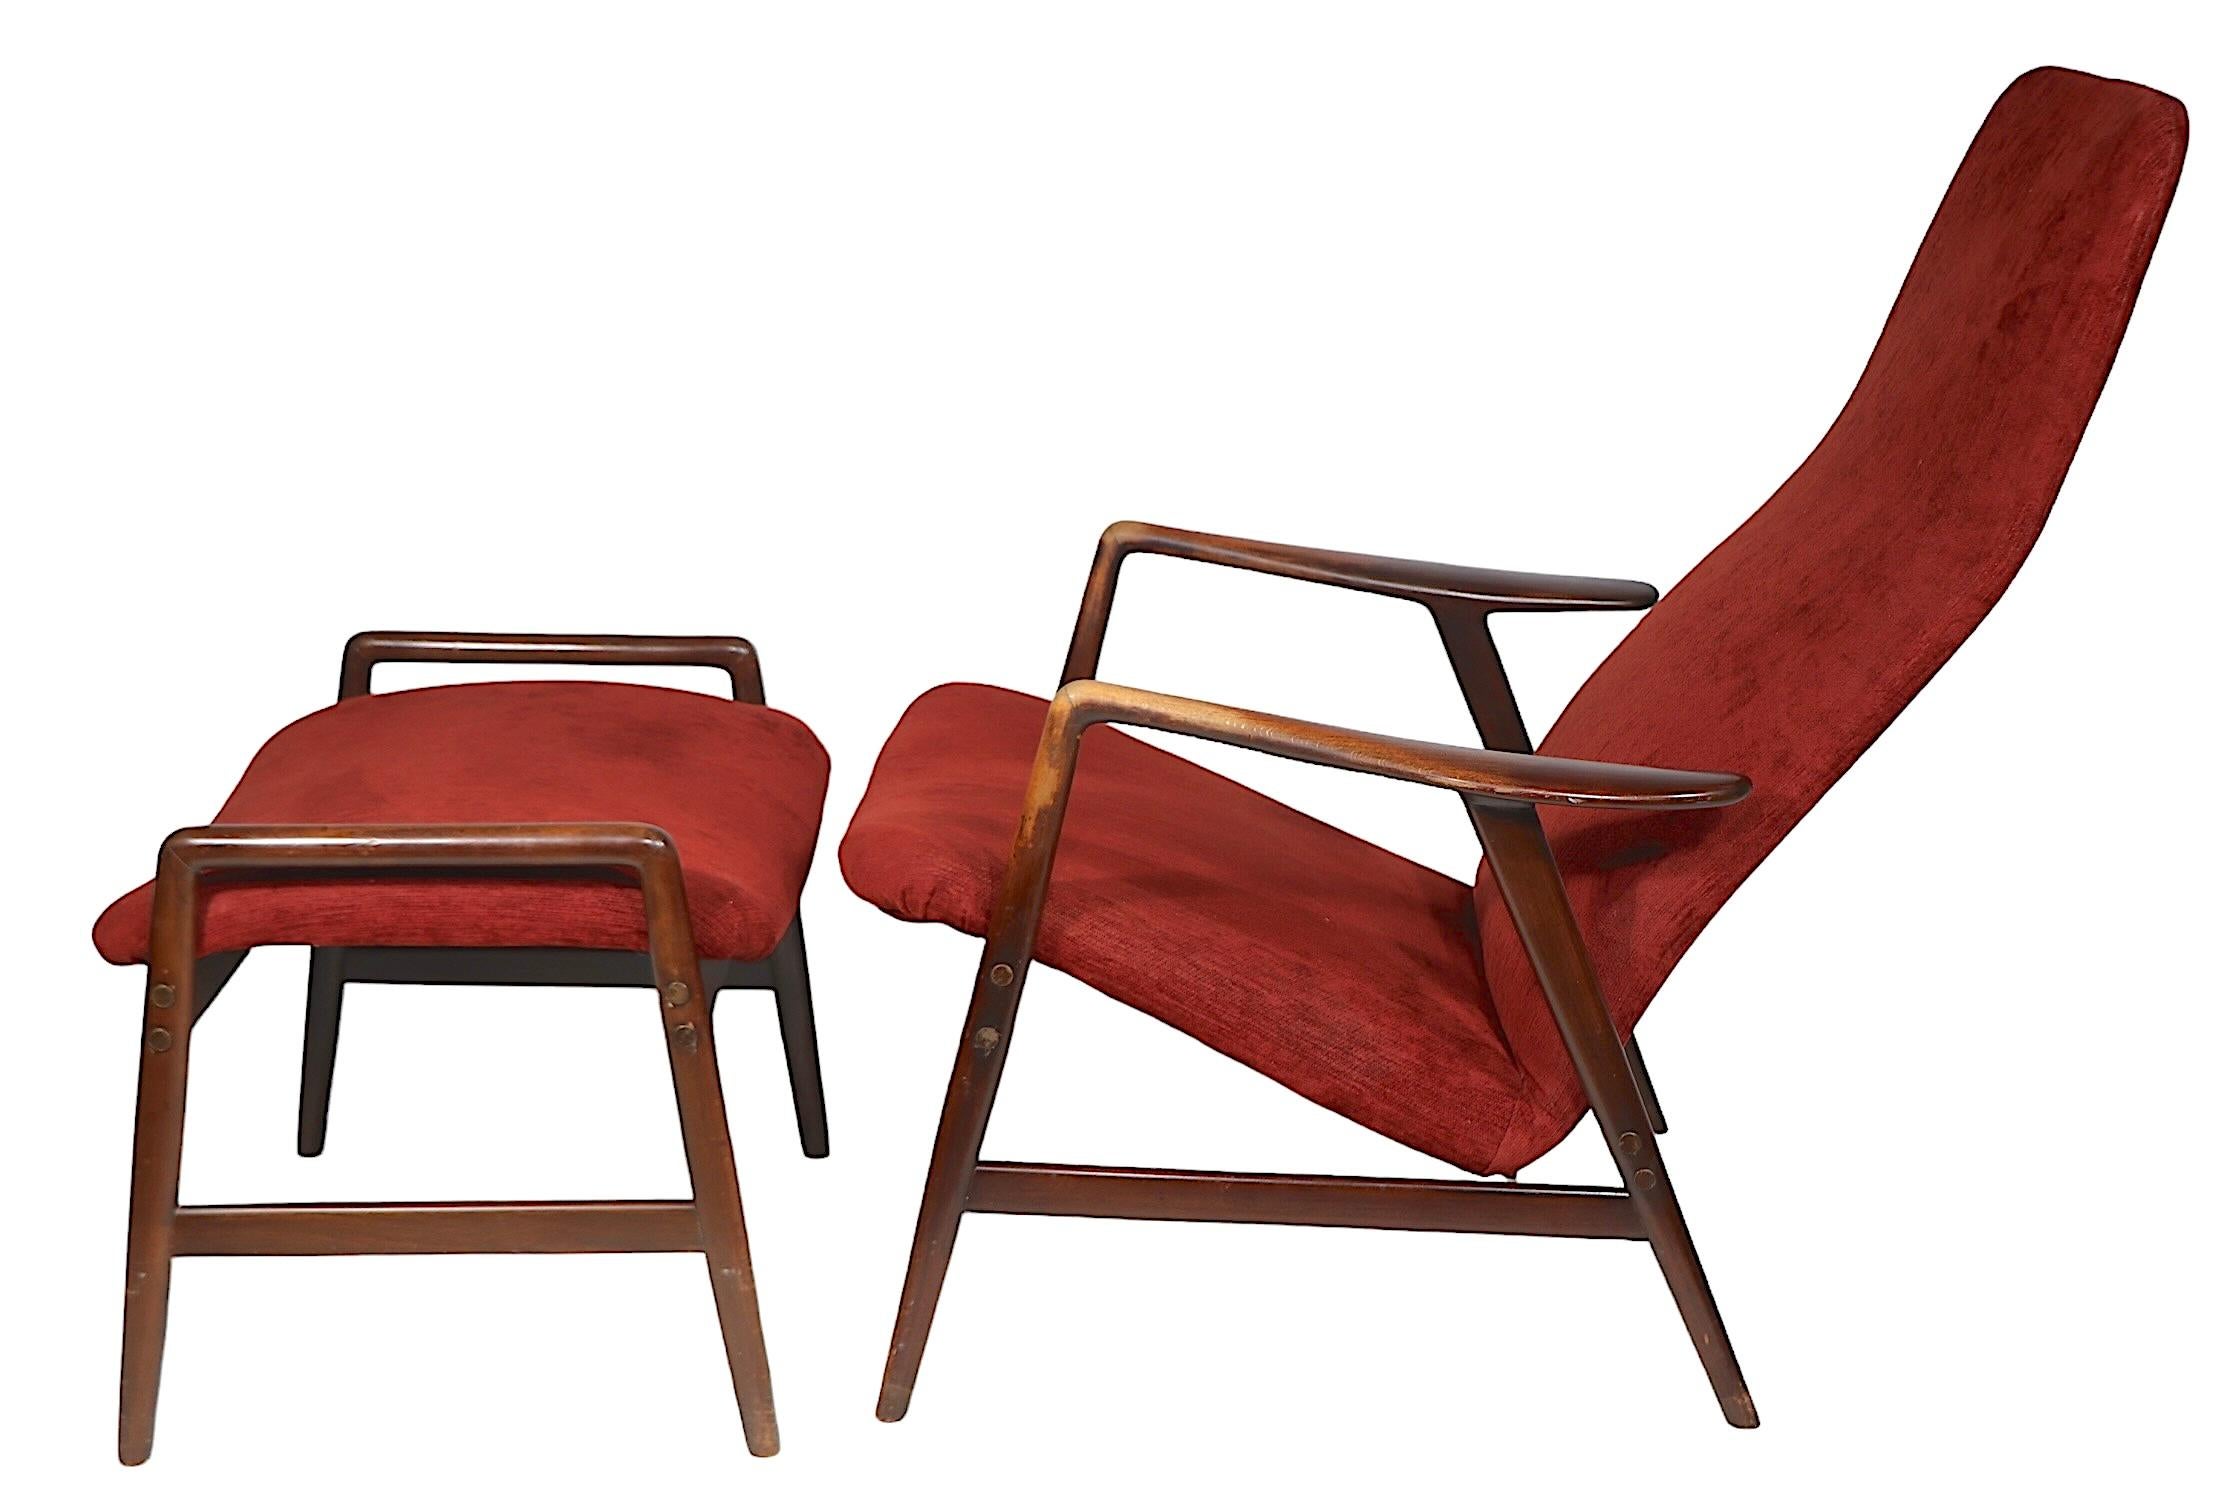 Upholstery Mid Century Lounge Chair and Ottoman by Alf Svensson for Fritz Hansen c. 1960's For Sale